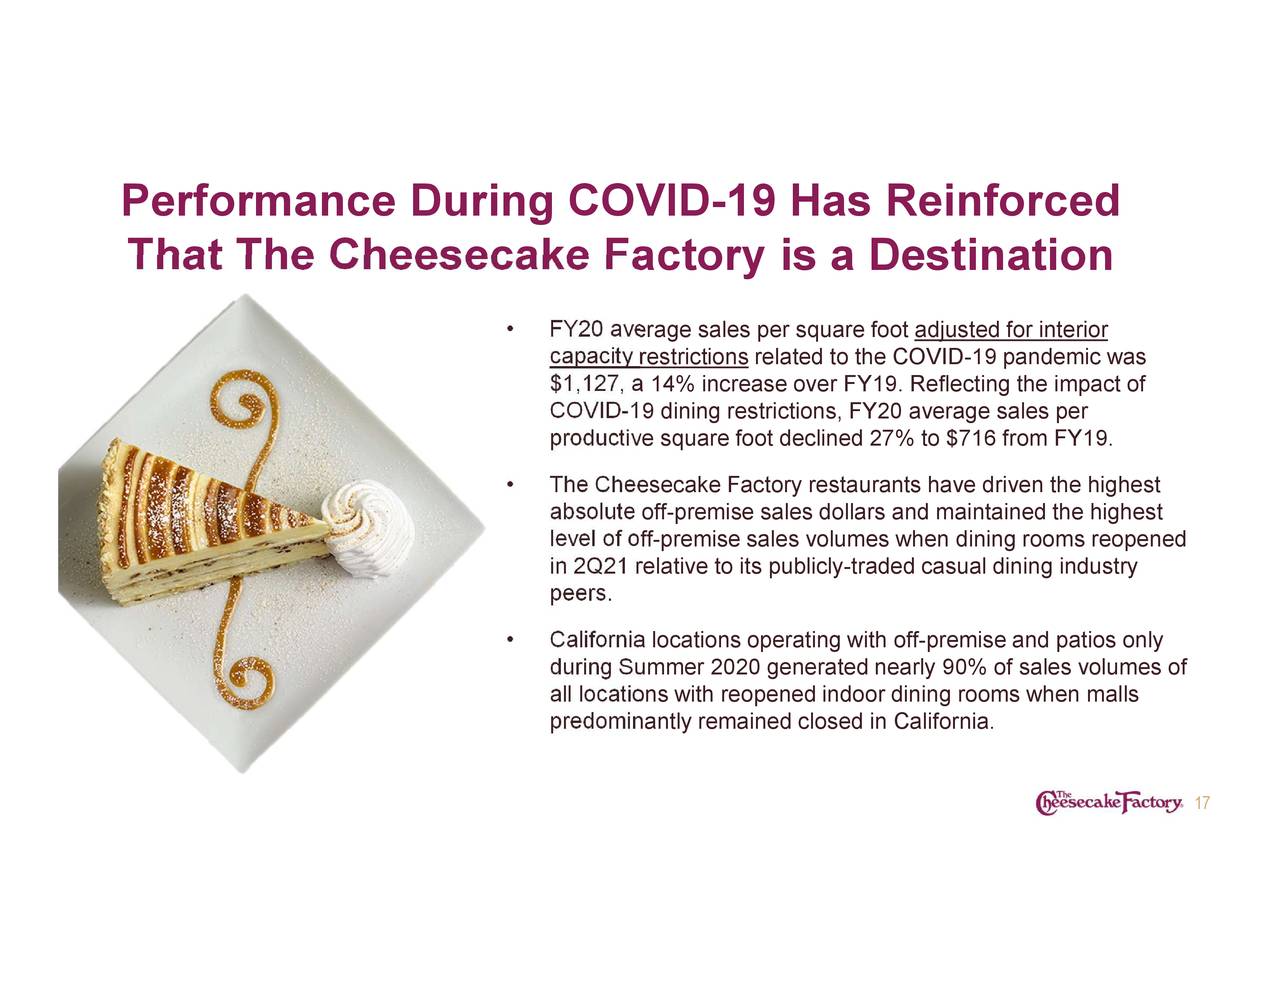 Performance During COVID-19 Has Reinforced